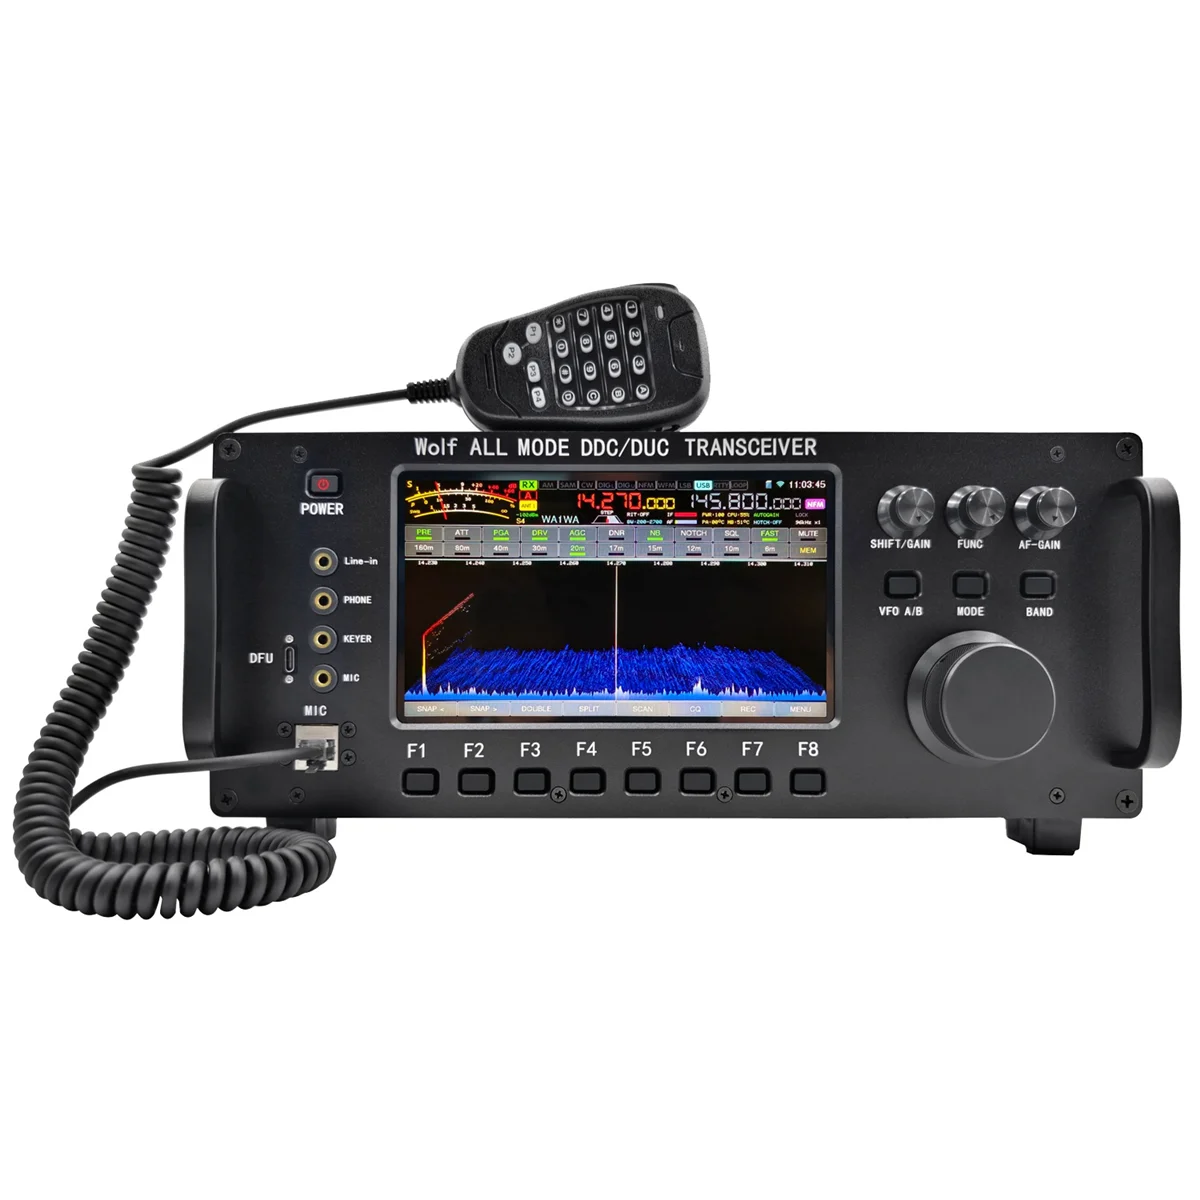 

20W 0-750MHz Wolf All Mode DDC/DUC Transceiver Mobile Radio LF/HF/6M/VHF/UHF Transceiver for UA3REO with WIFI Function